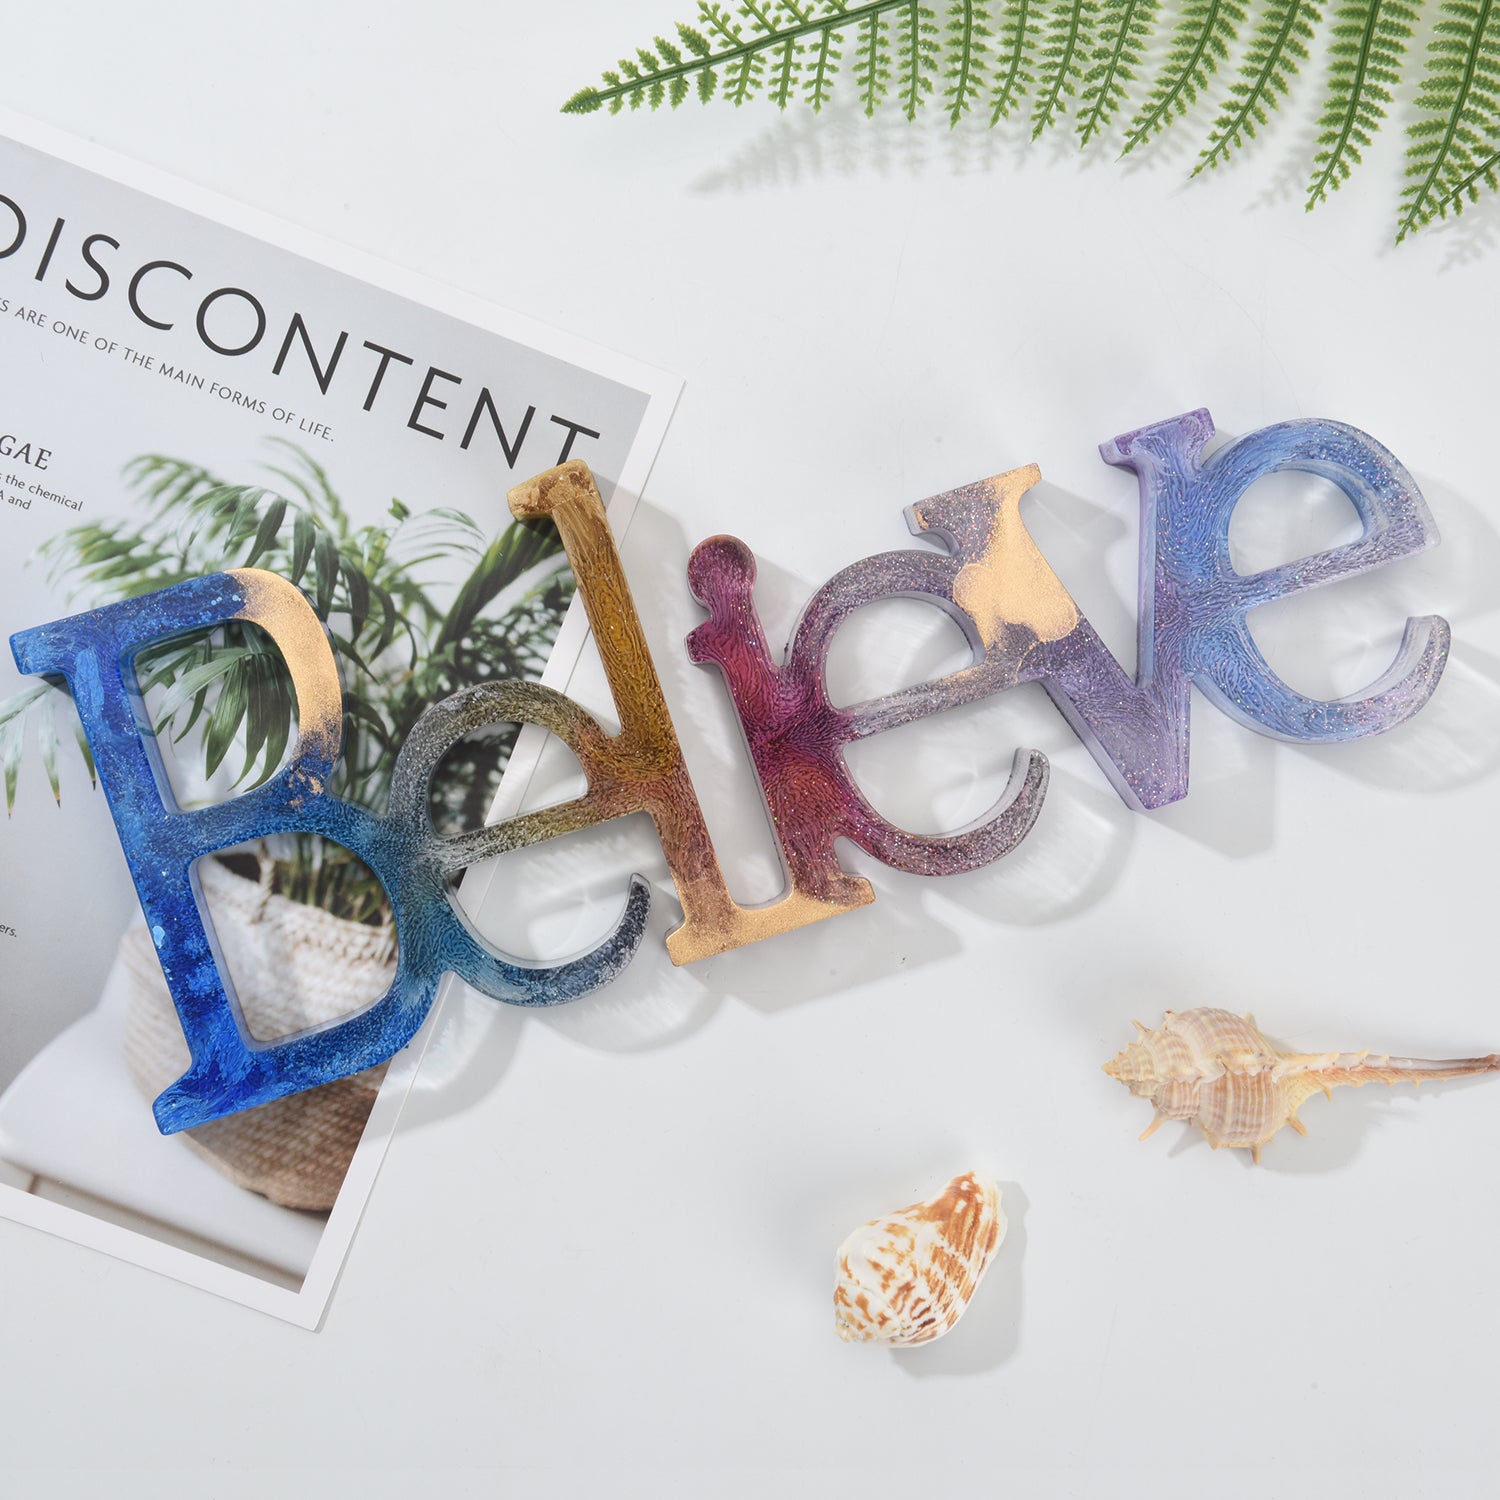 Believe Word Sign Molds